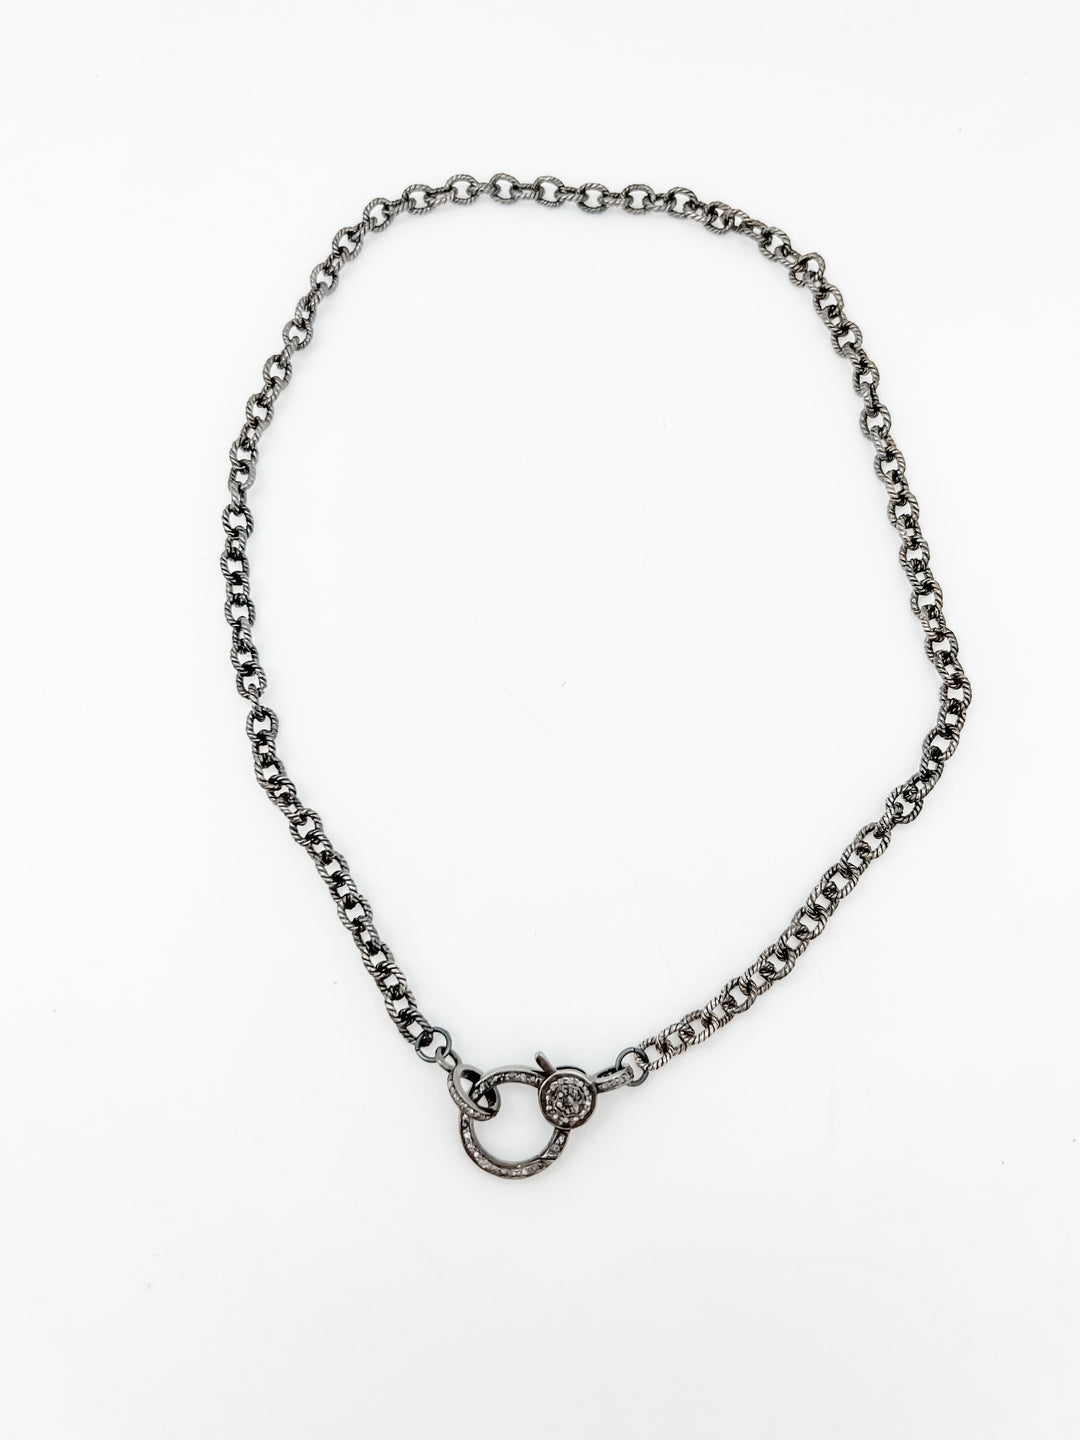 Small sterling Silver Chain